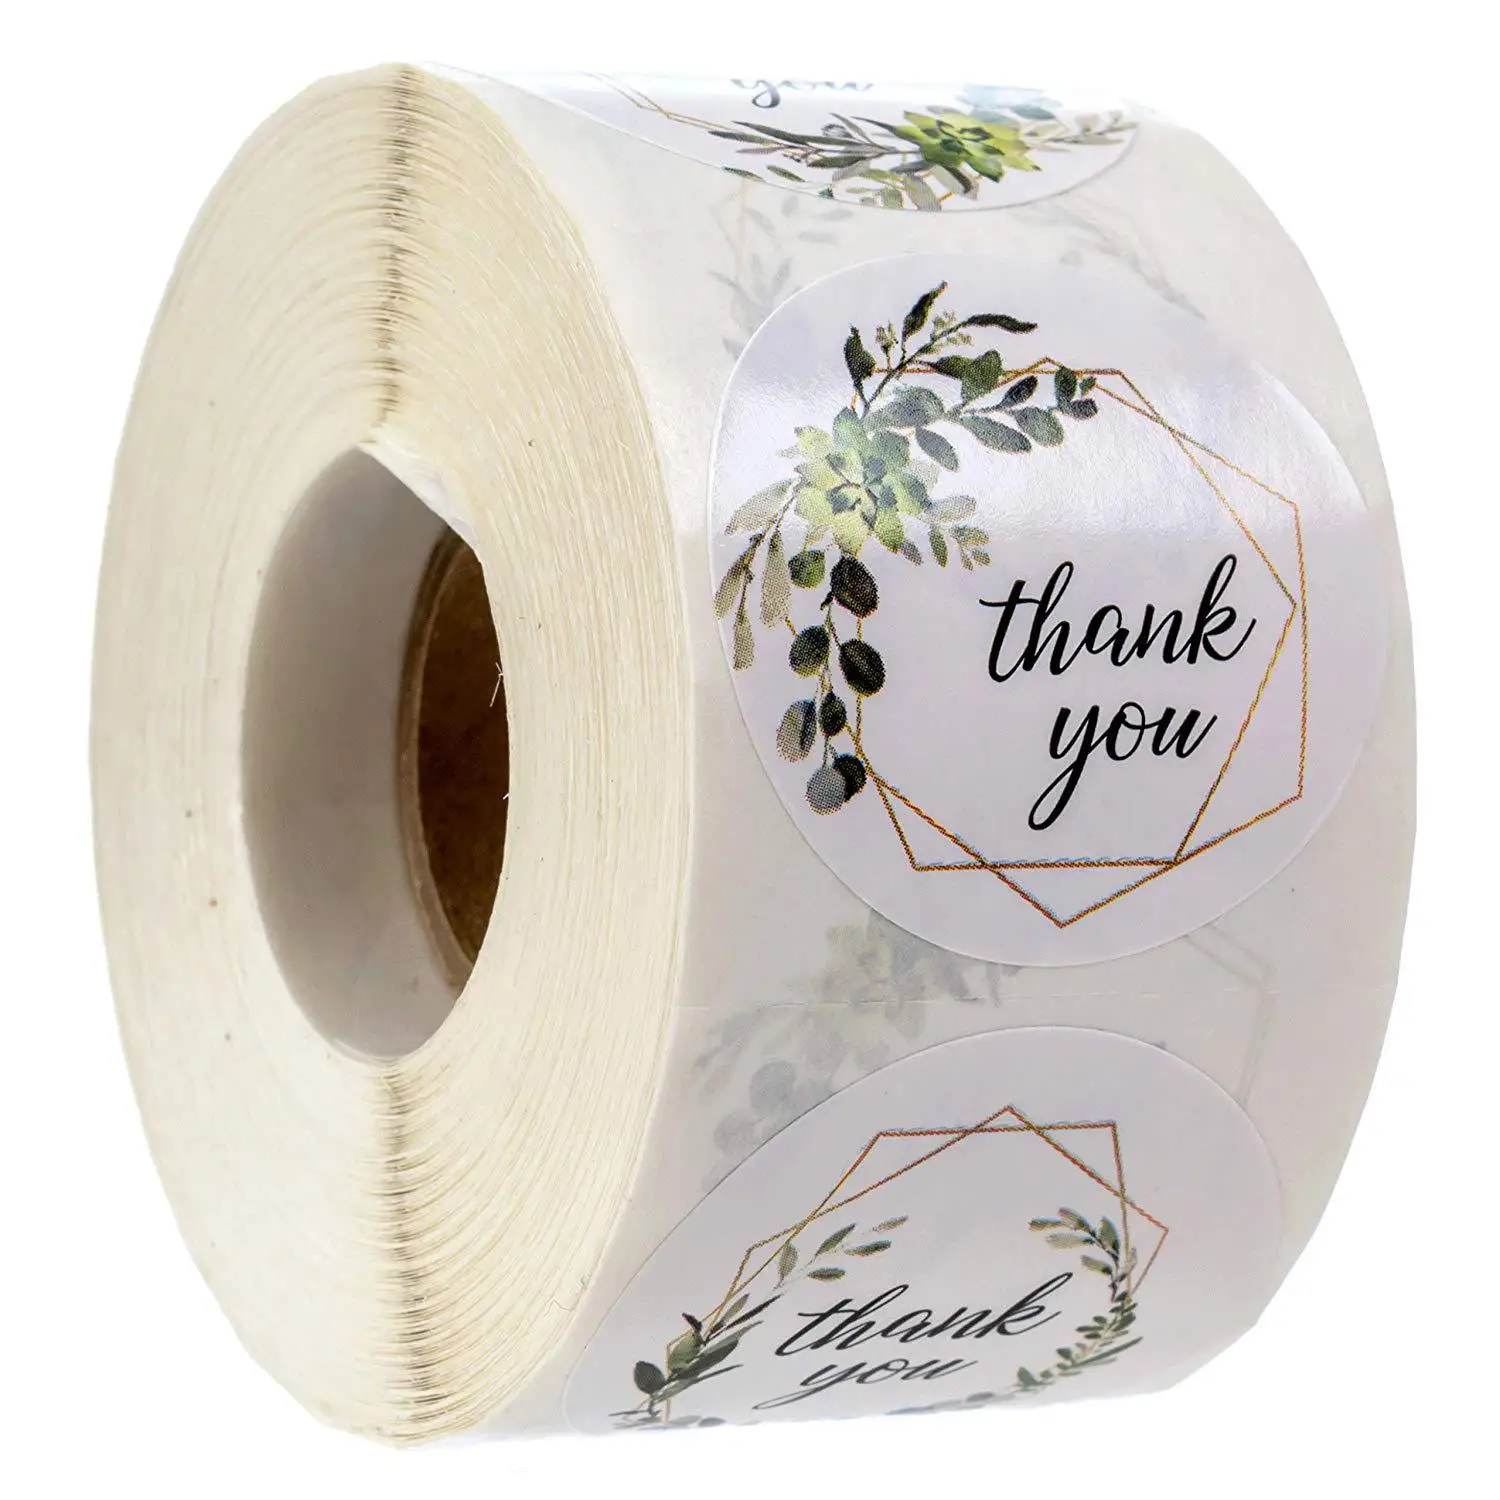 

Roll sealed sticker thank you for handcraft decorative sticker label